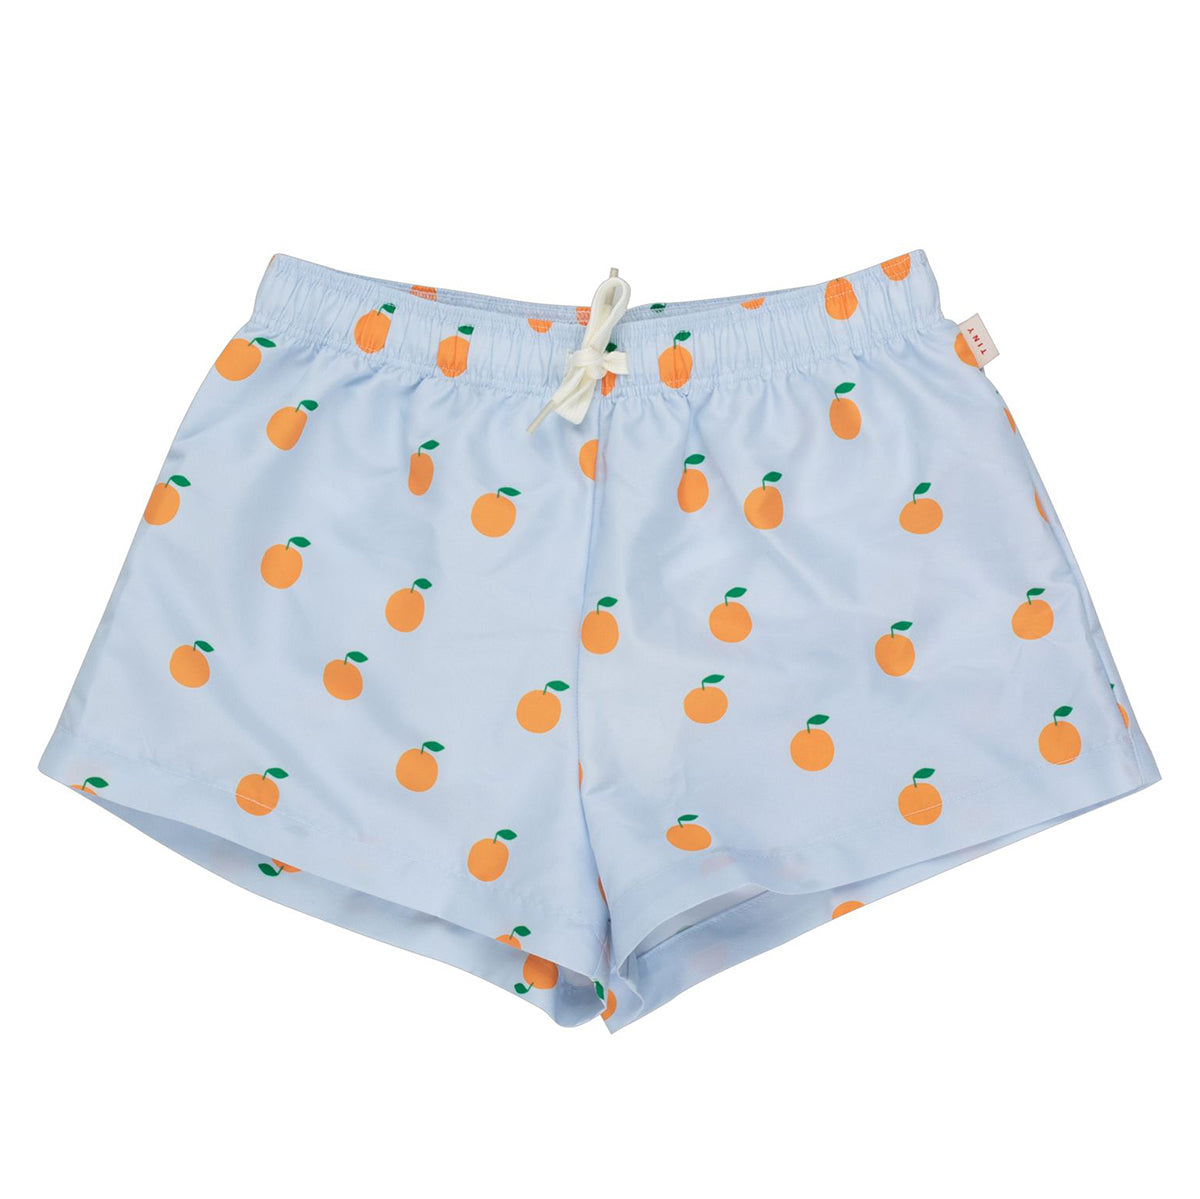 Tinycottons Tiny Cottons Oranges Swimming Trunks